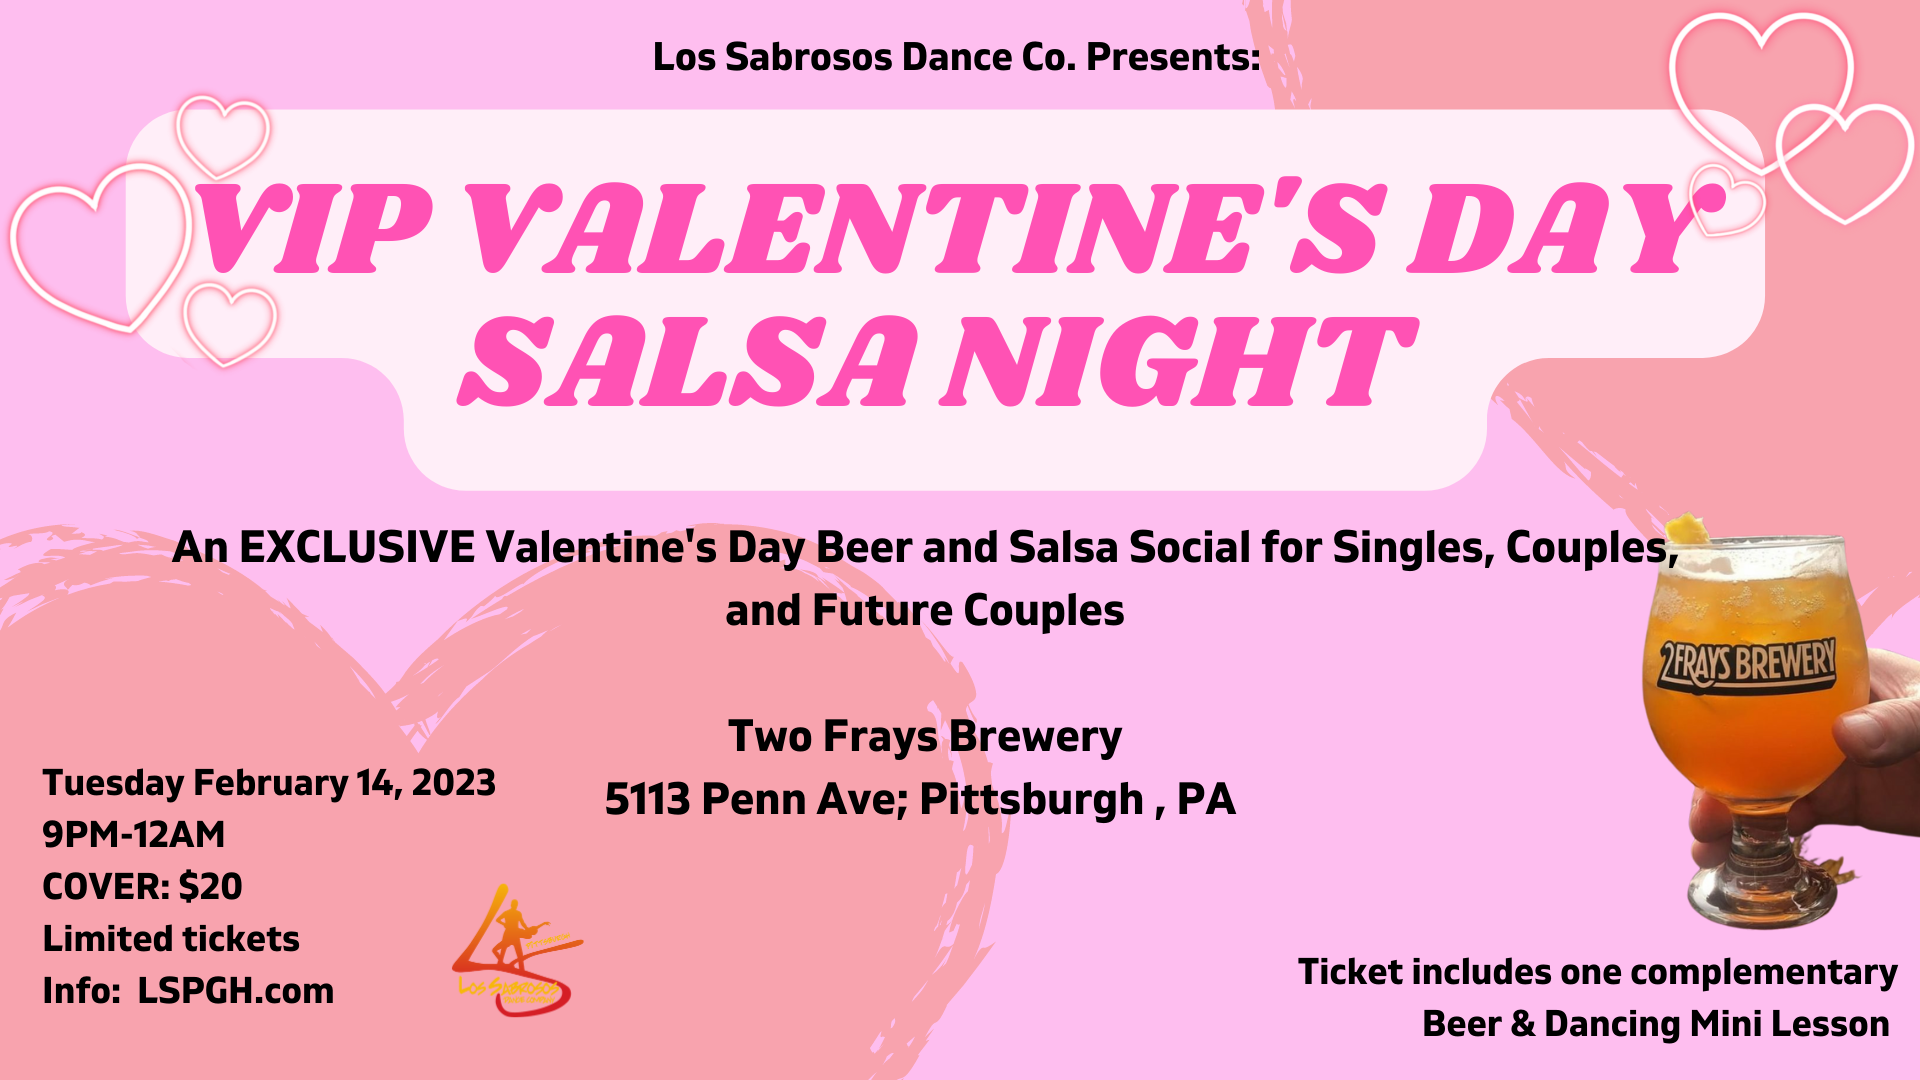 VIP Valentine's Day Event at Two Frays Brewery!